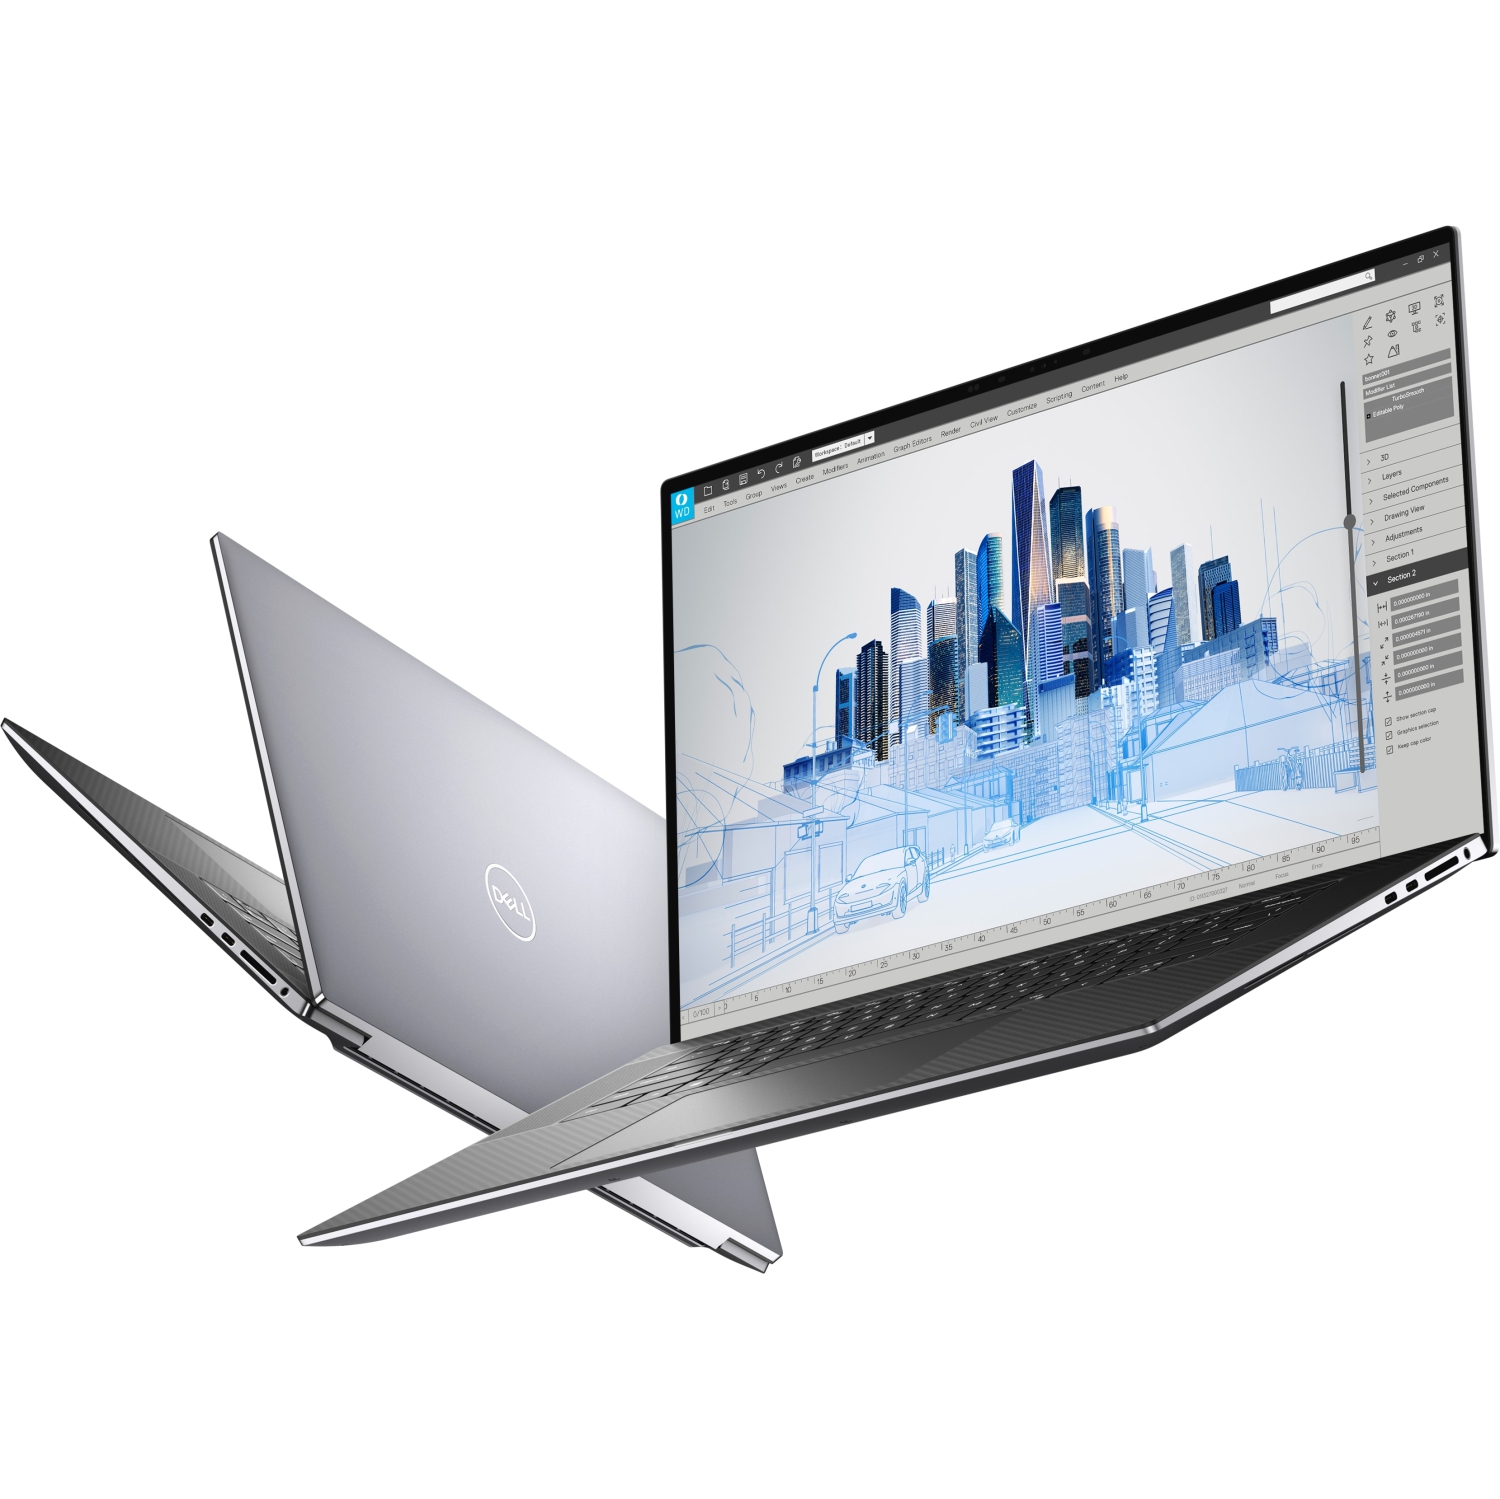 Refurbished (Excellent) - Dell Precision 5000 5760 Workstation Laptop (2021), 17" FHD+, Core i9, 512GB SSD, 32GB RAM, RTX A3000, 5 GHz, 11th Gen CPU Certified Refurbished